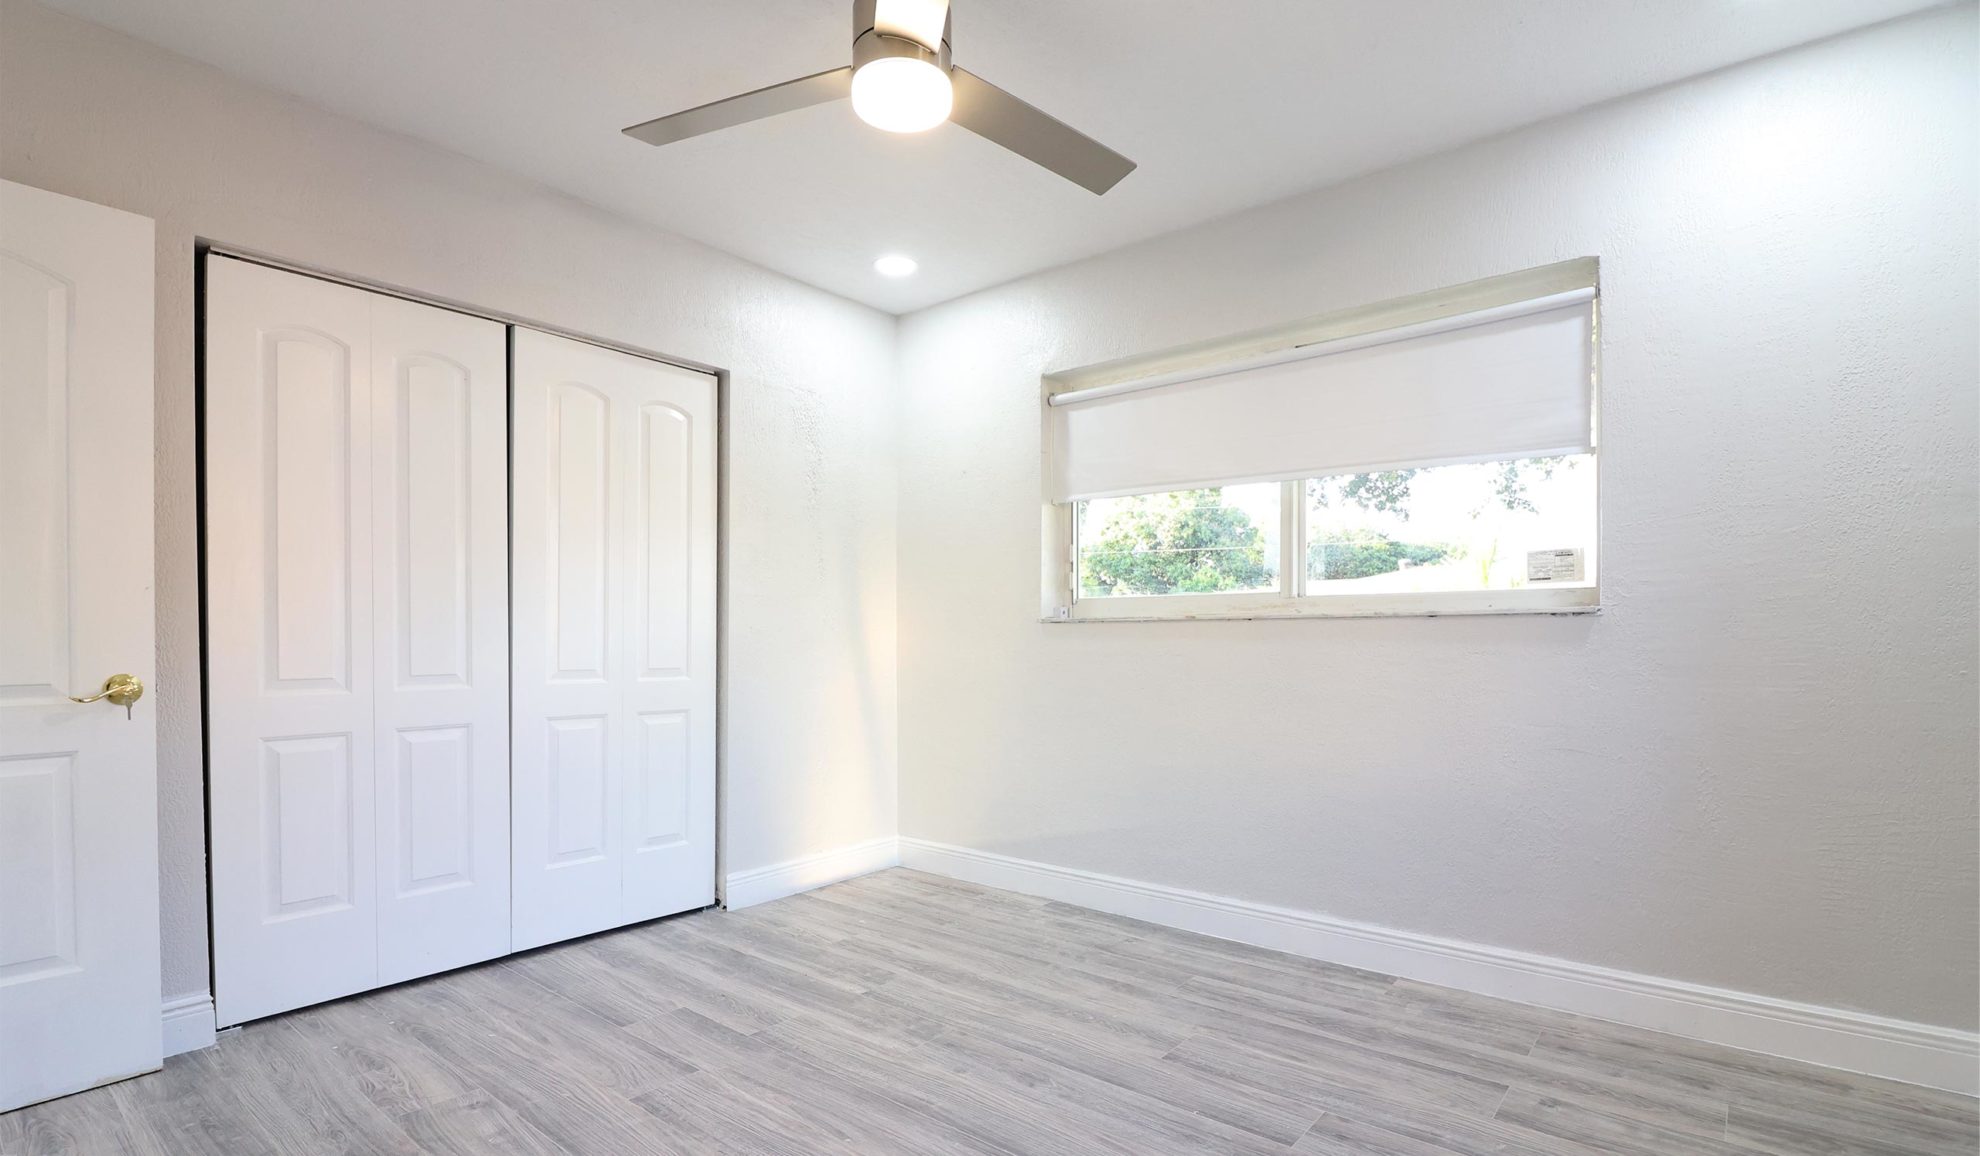 empty bedroom interiors with recessed lighting and ceiling lamp with fan installed davie fl